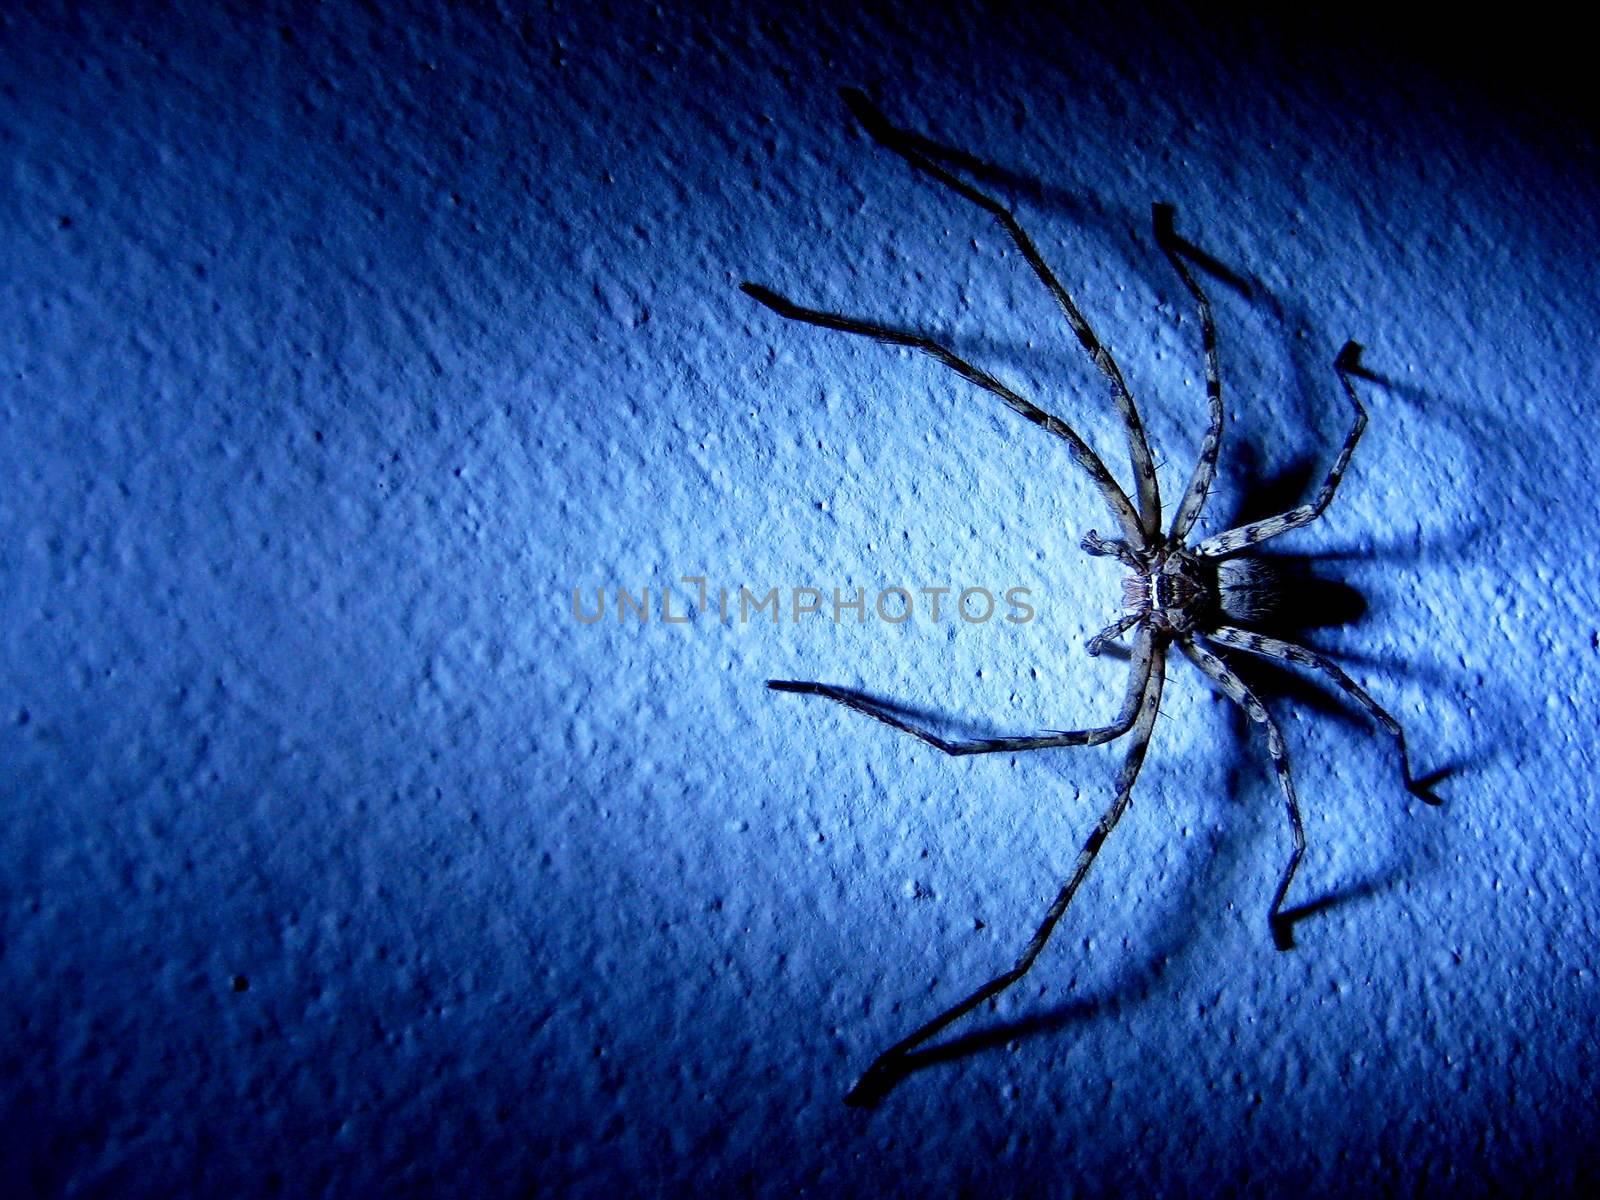 Spider is on the wall in the dark with the blue light.